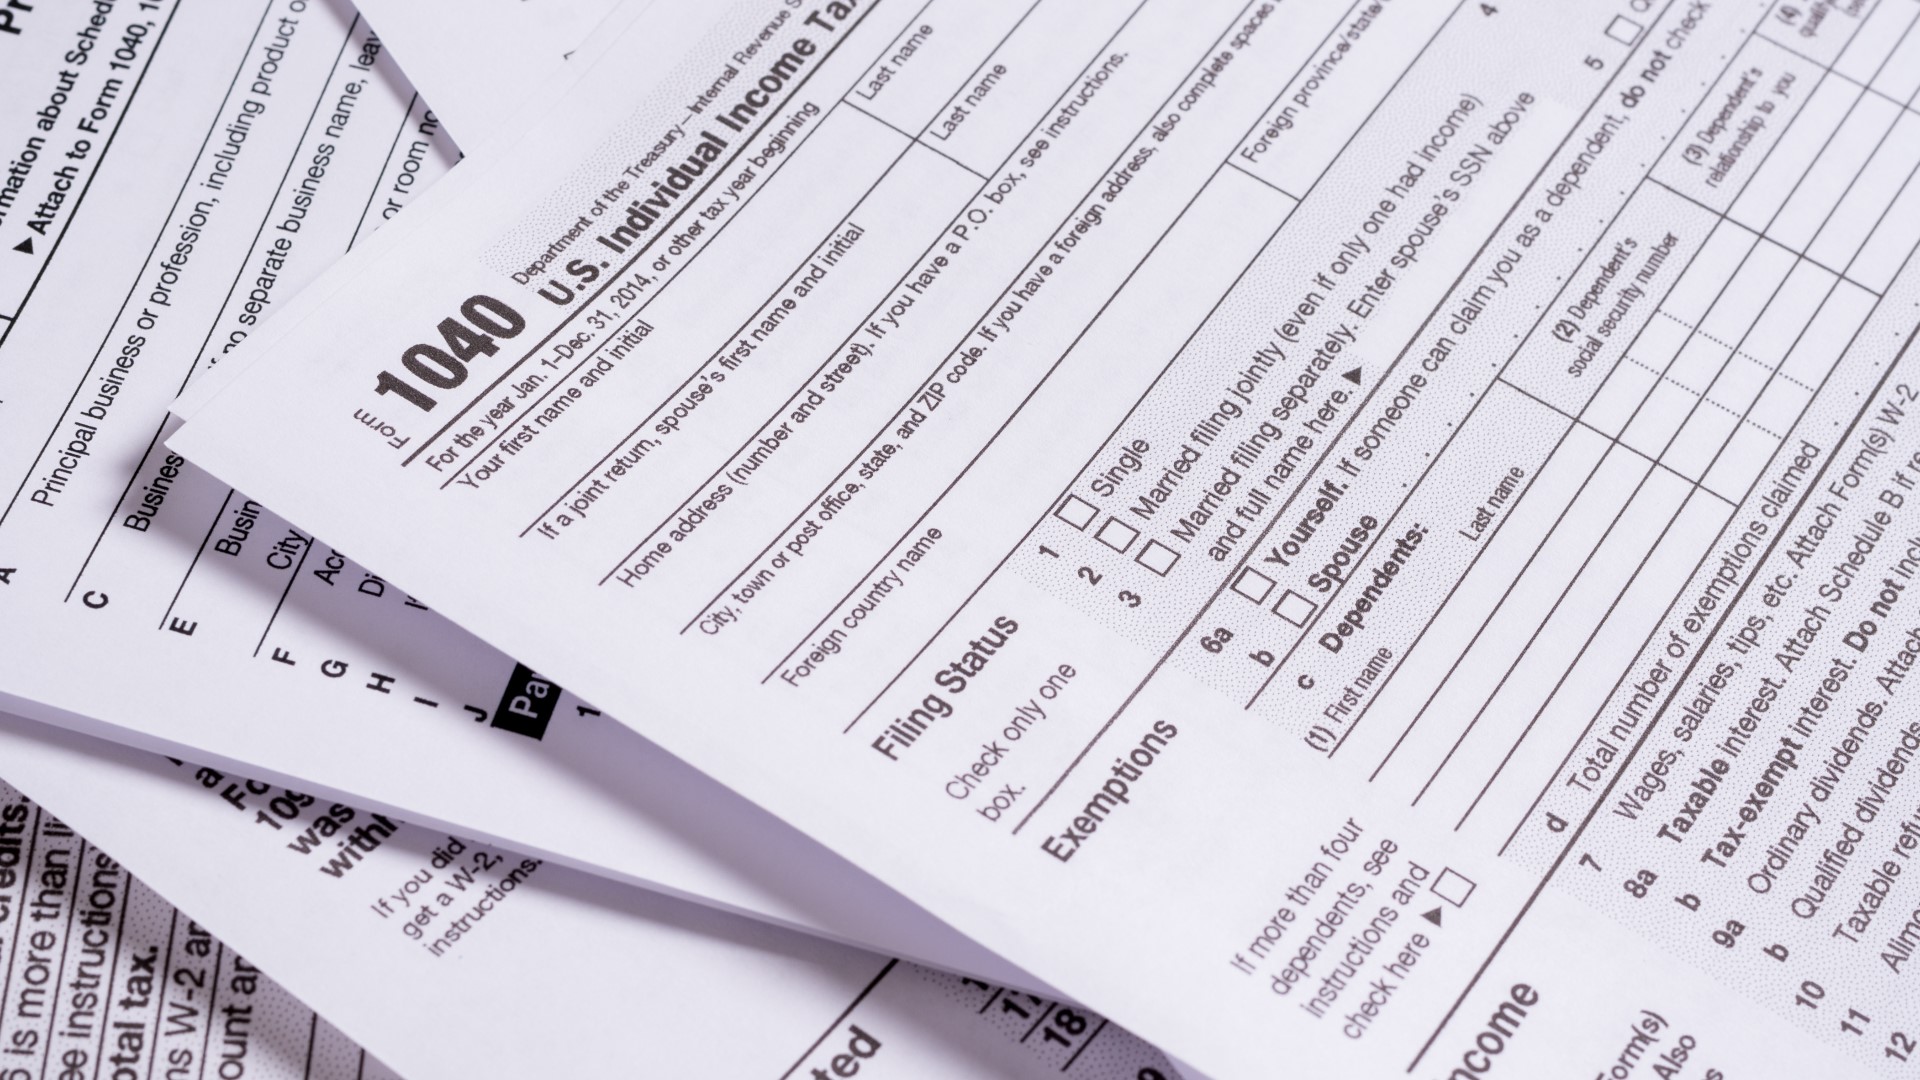 If you were granted relief after Hurricane Ian last year, the SC Revenue Department says you have a month left to file for your 20-21 state income tax return.